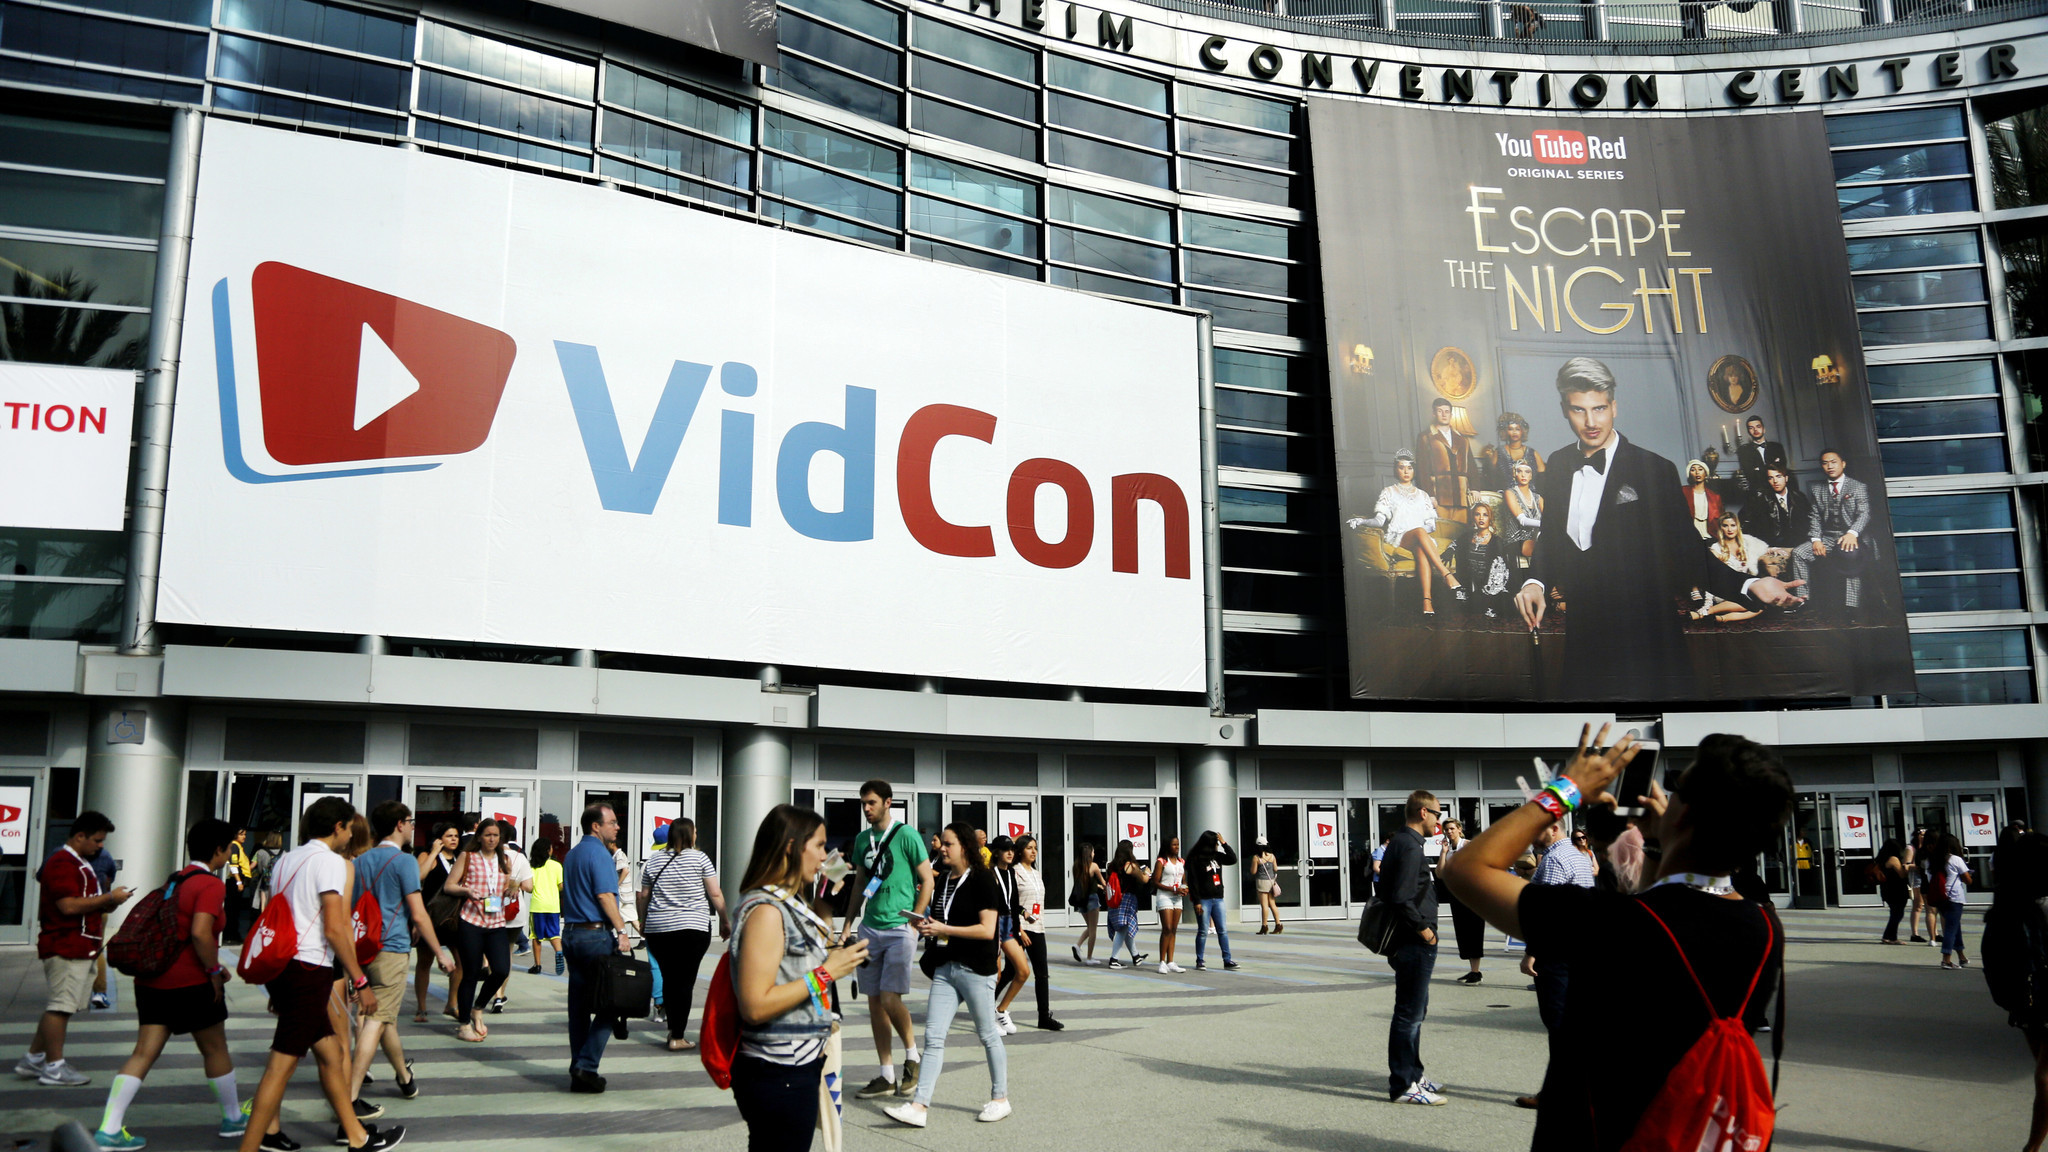 All the new things coming to YouTube from last week’s VidCon